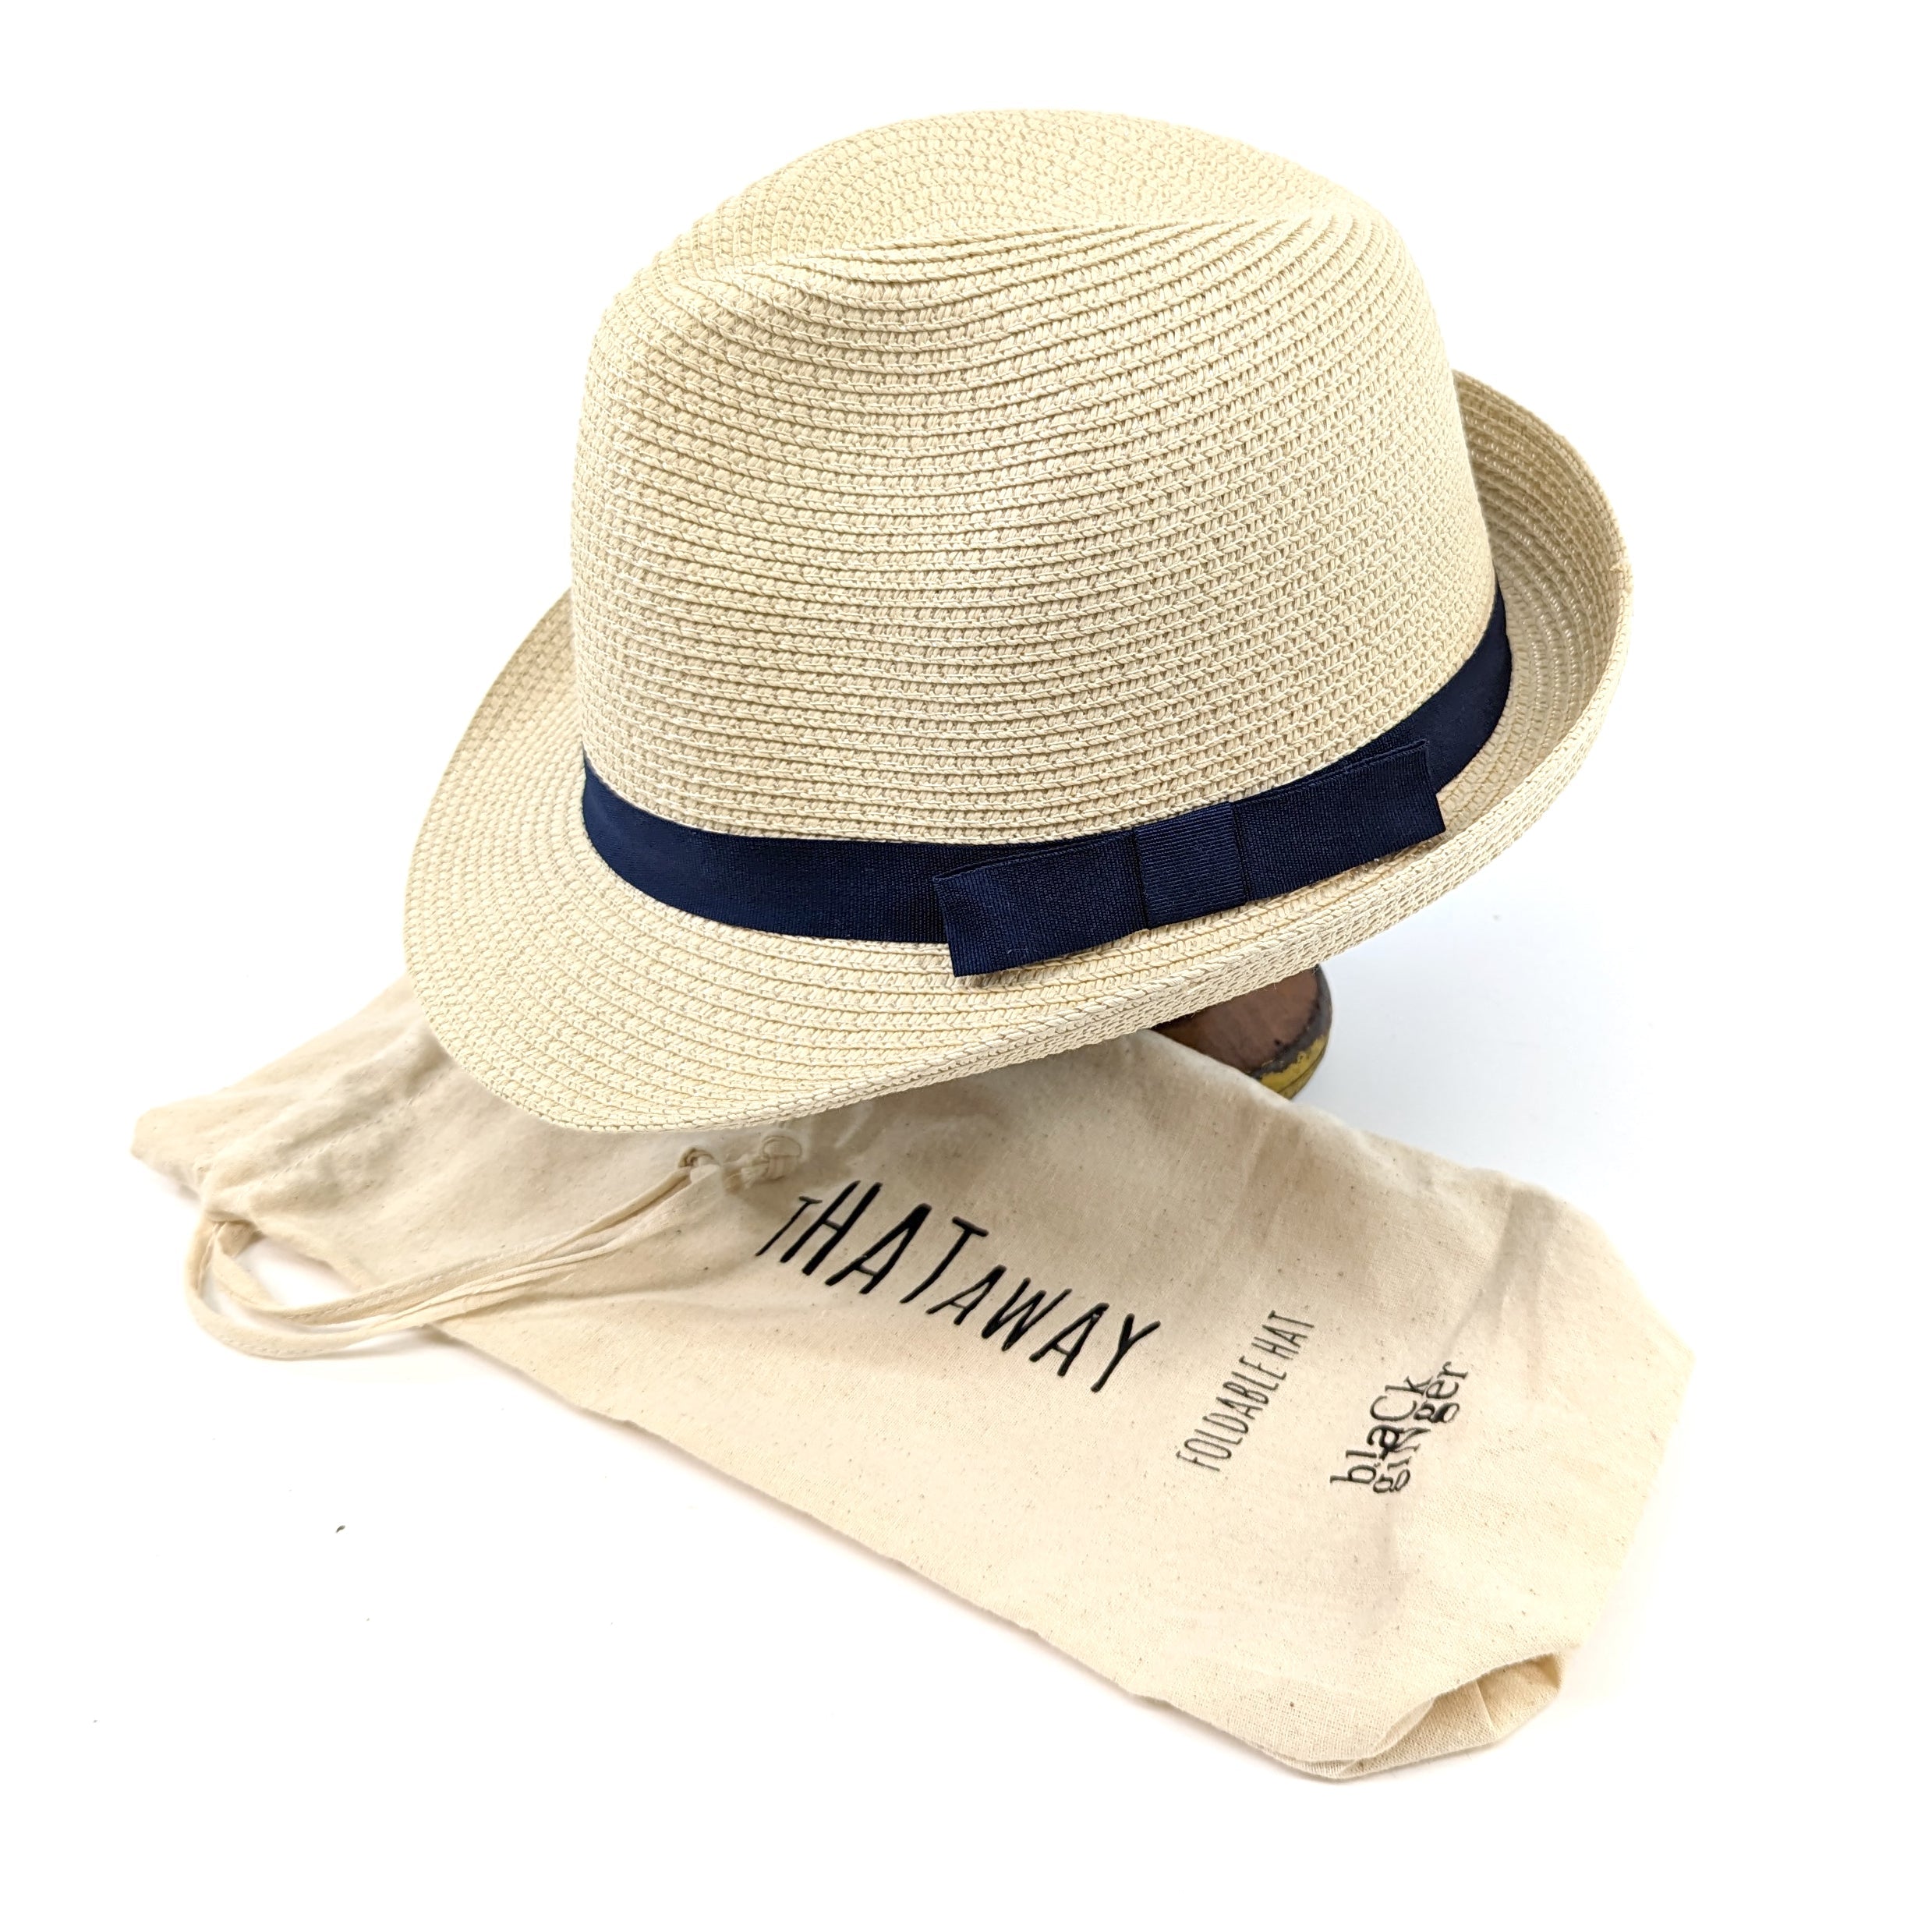 Trilby Style Sun Hat with a Blue Band (59cm)